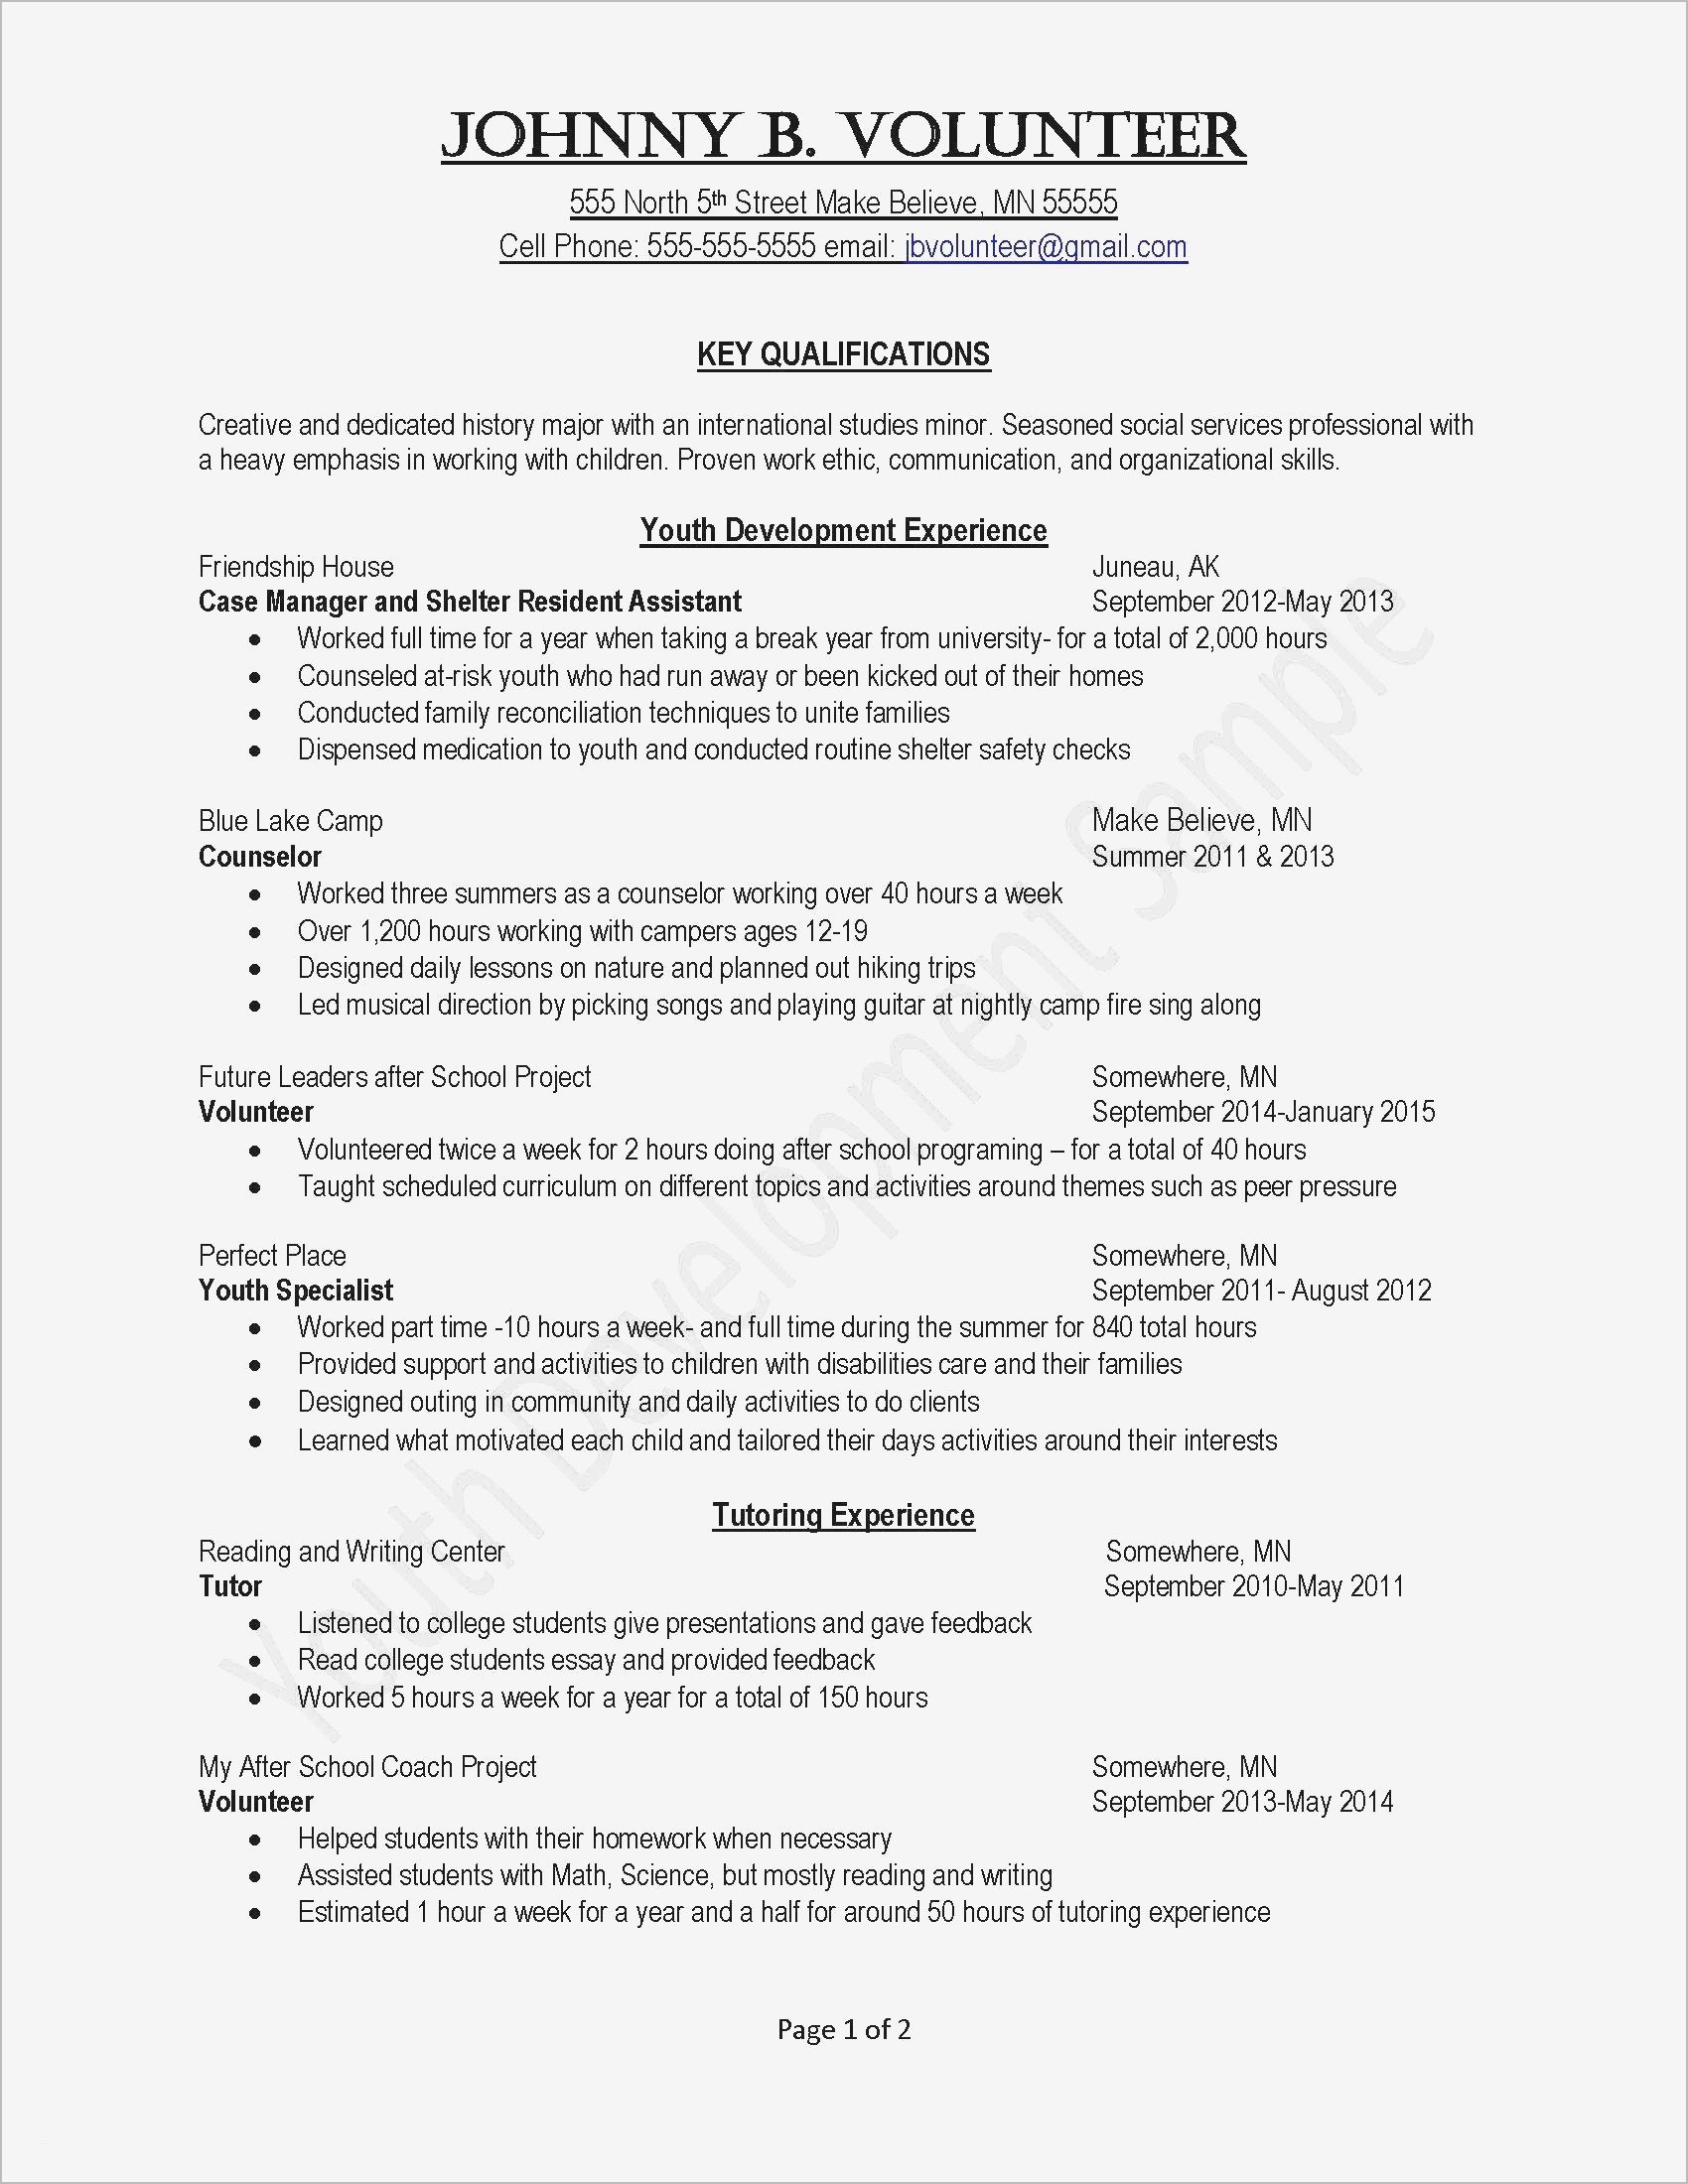 free online resume cover letter template Collection-Resume Template line Free Fresh Job Fer Letter Template Us Copy Od Consultant Cover Letter Fungram 19-r